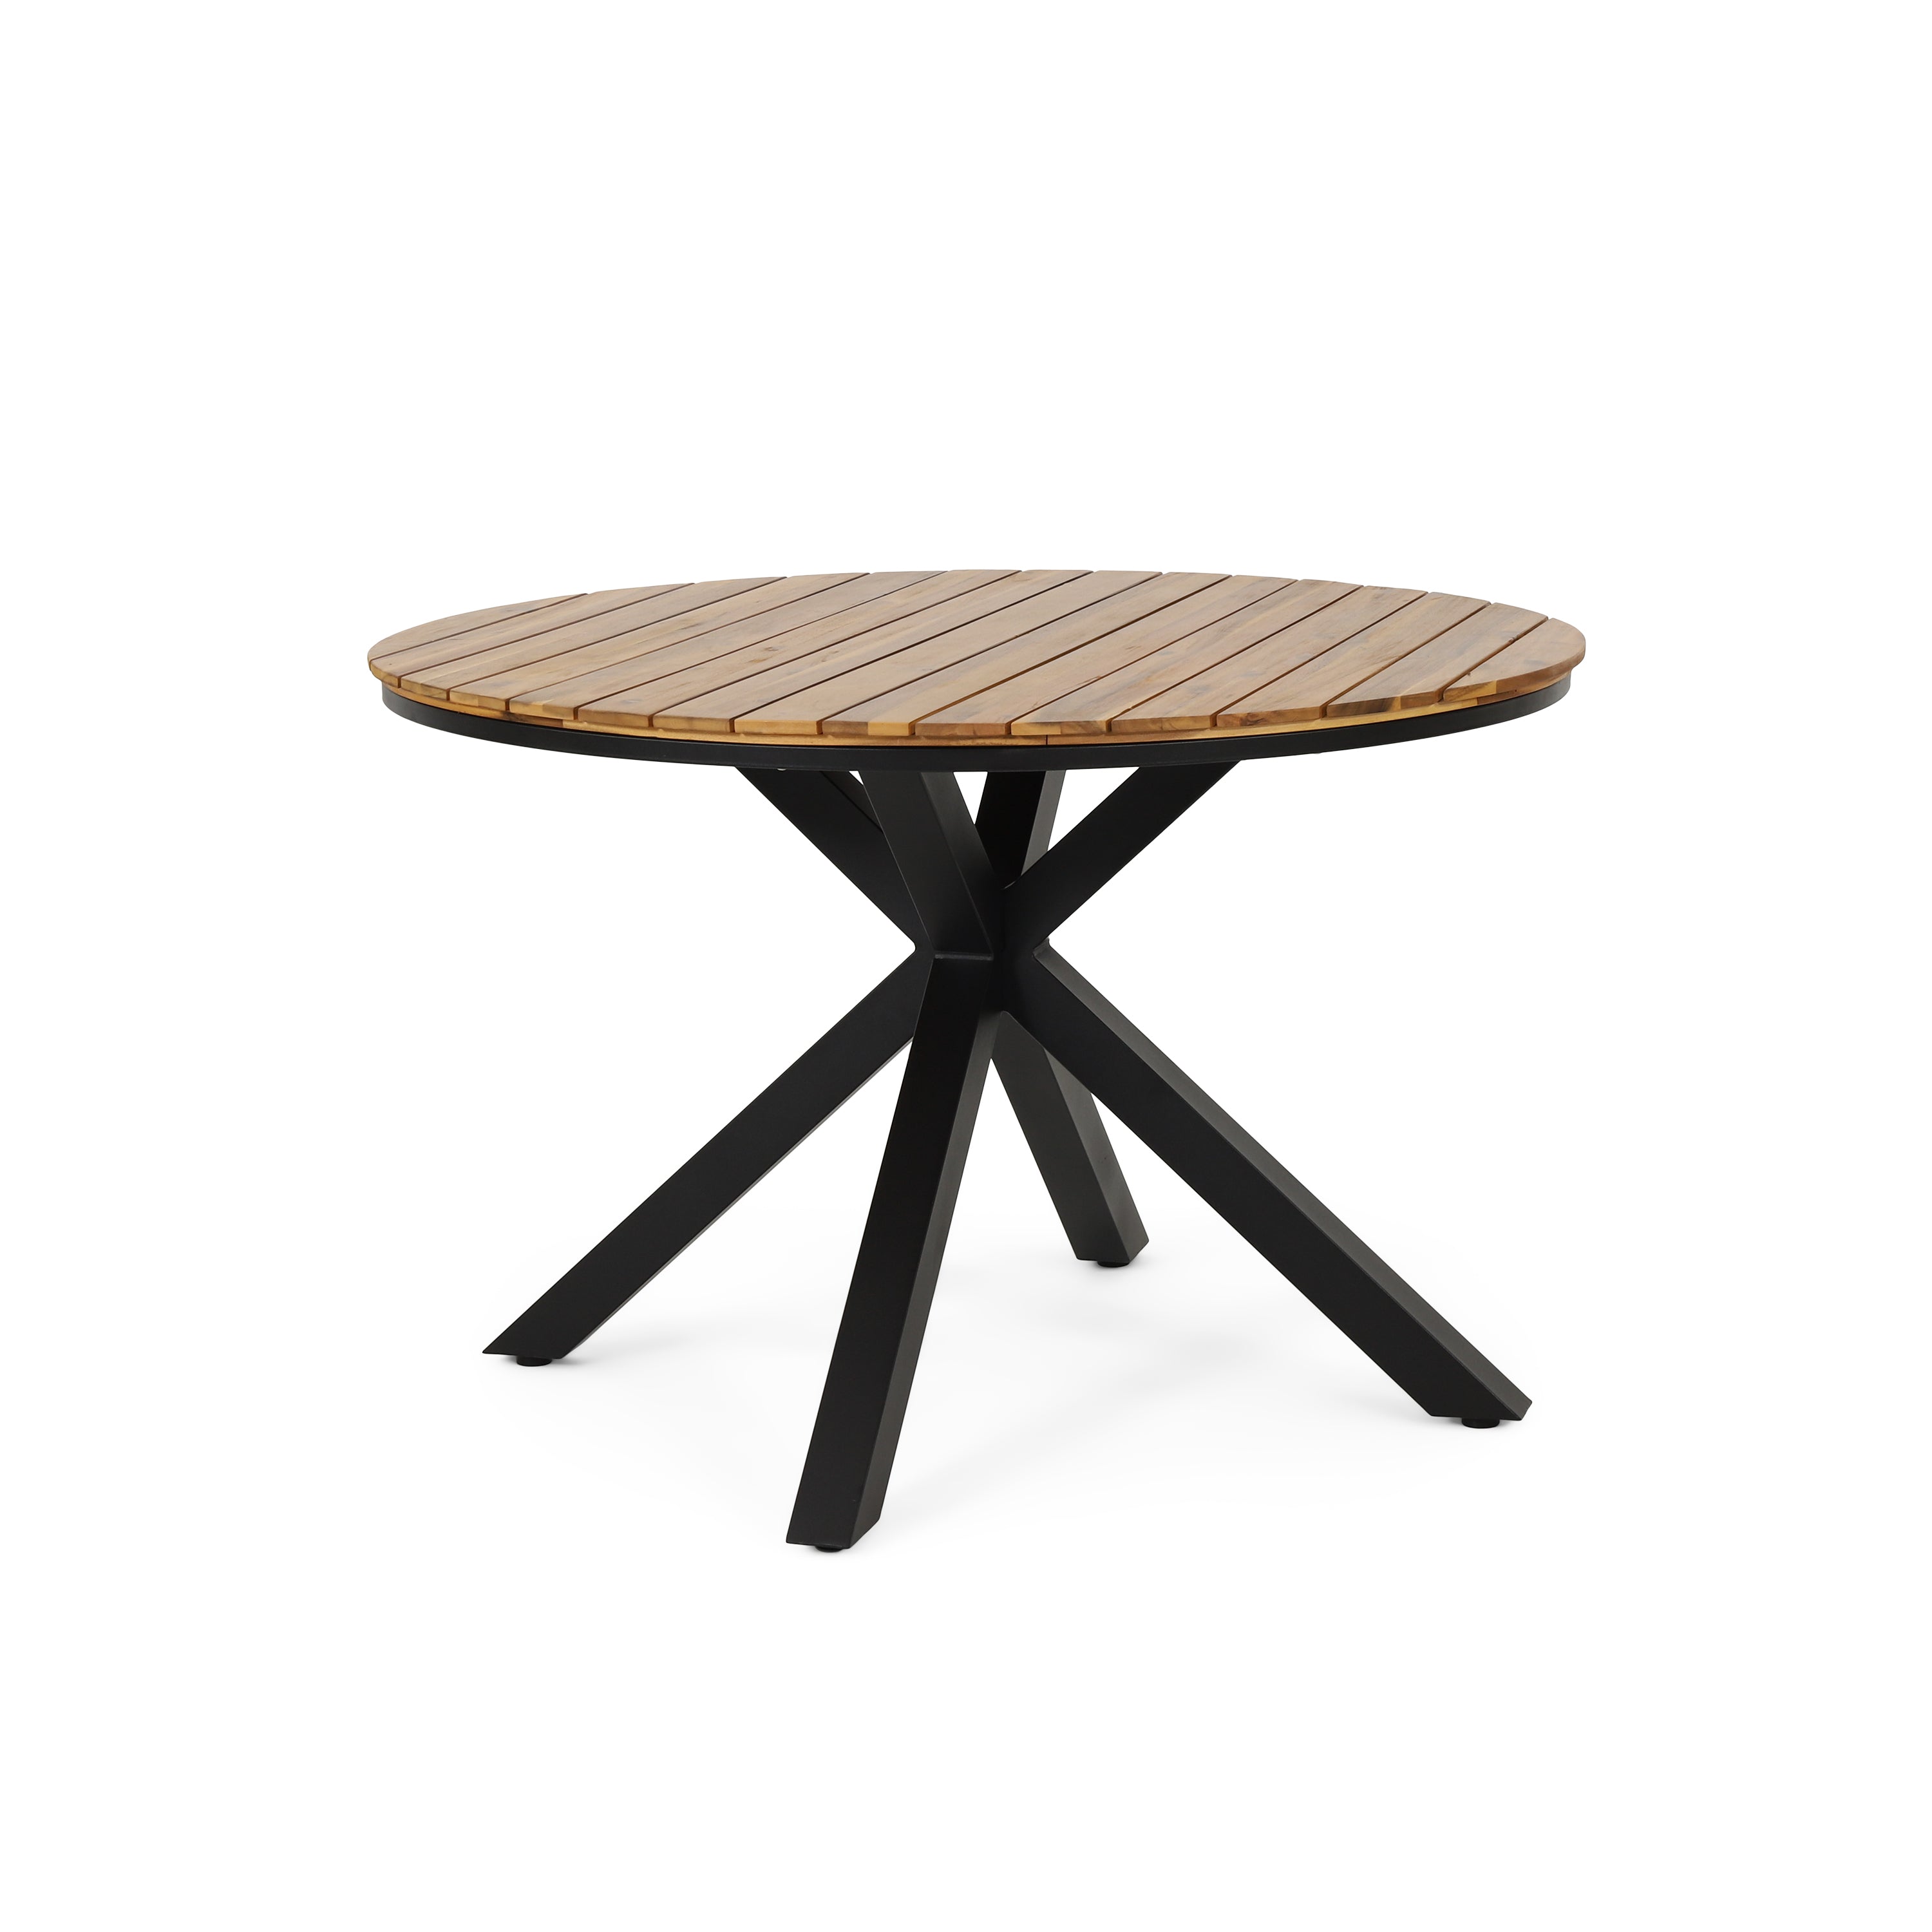 Mellie Outdoor Acacia Dining Table, Teak – GDFStudio